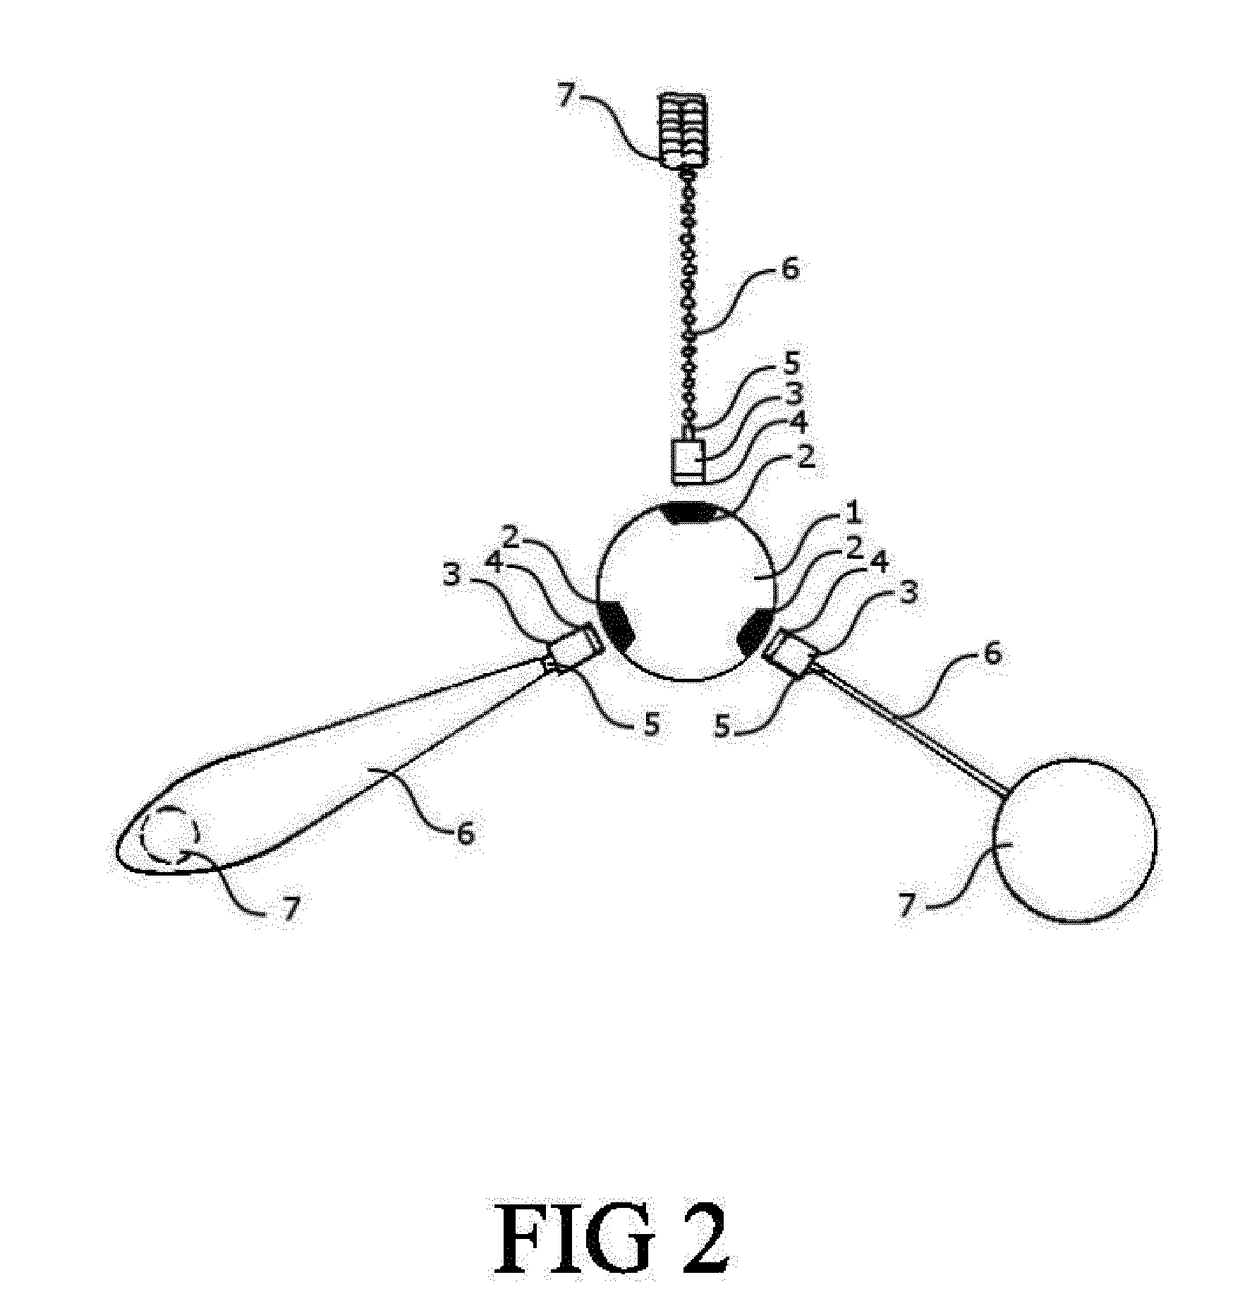 Set of adjustable juggling modules including a facilitating detachable or fixed fastening device and an integrated training system